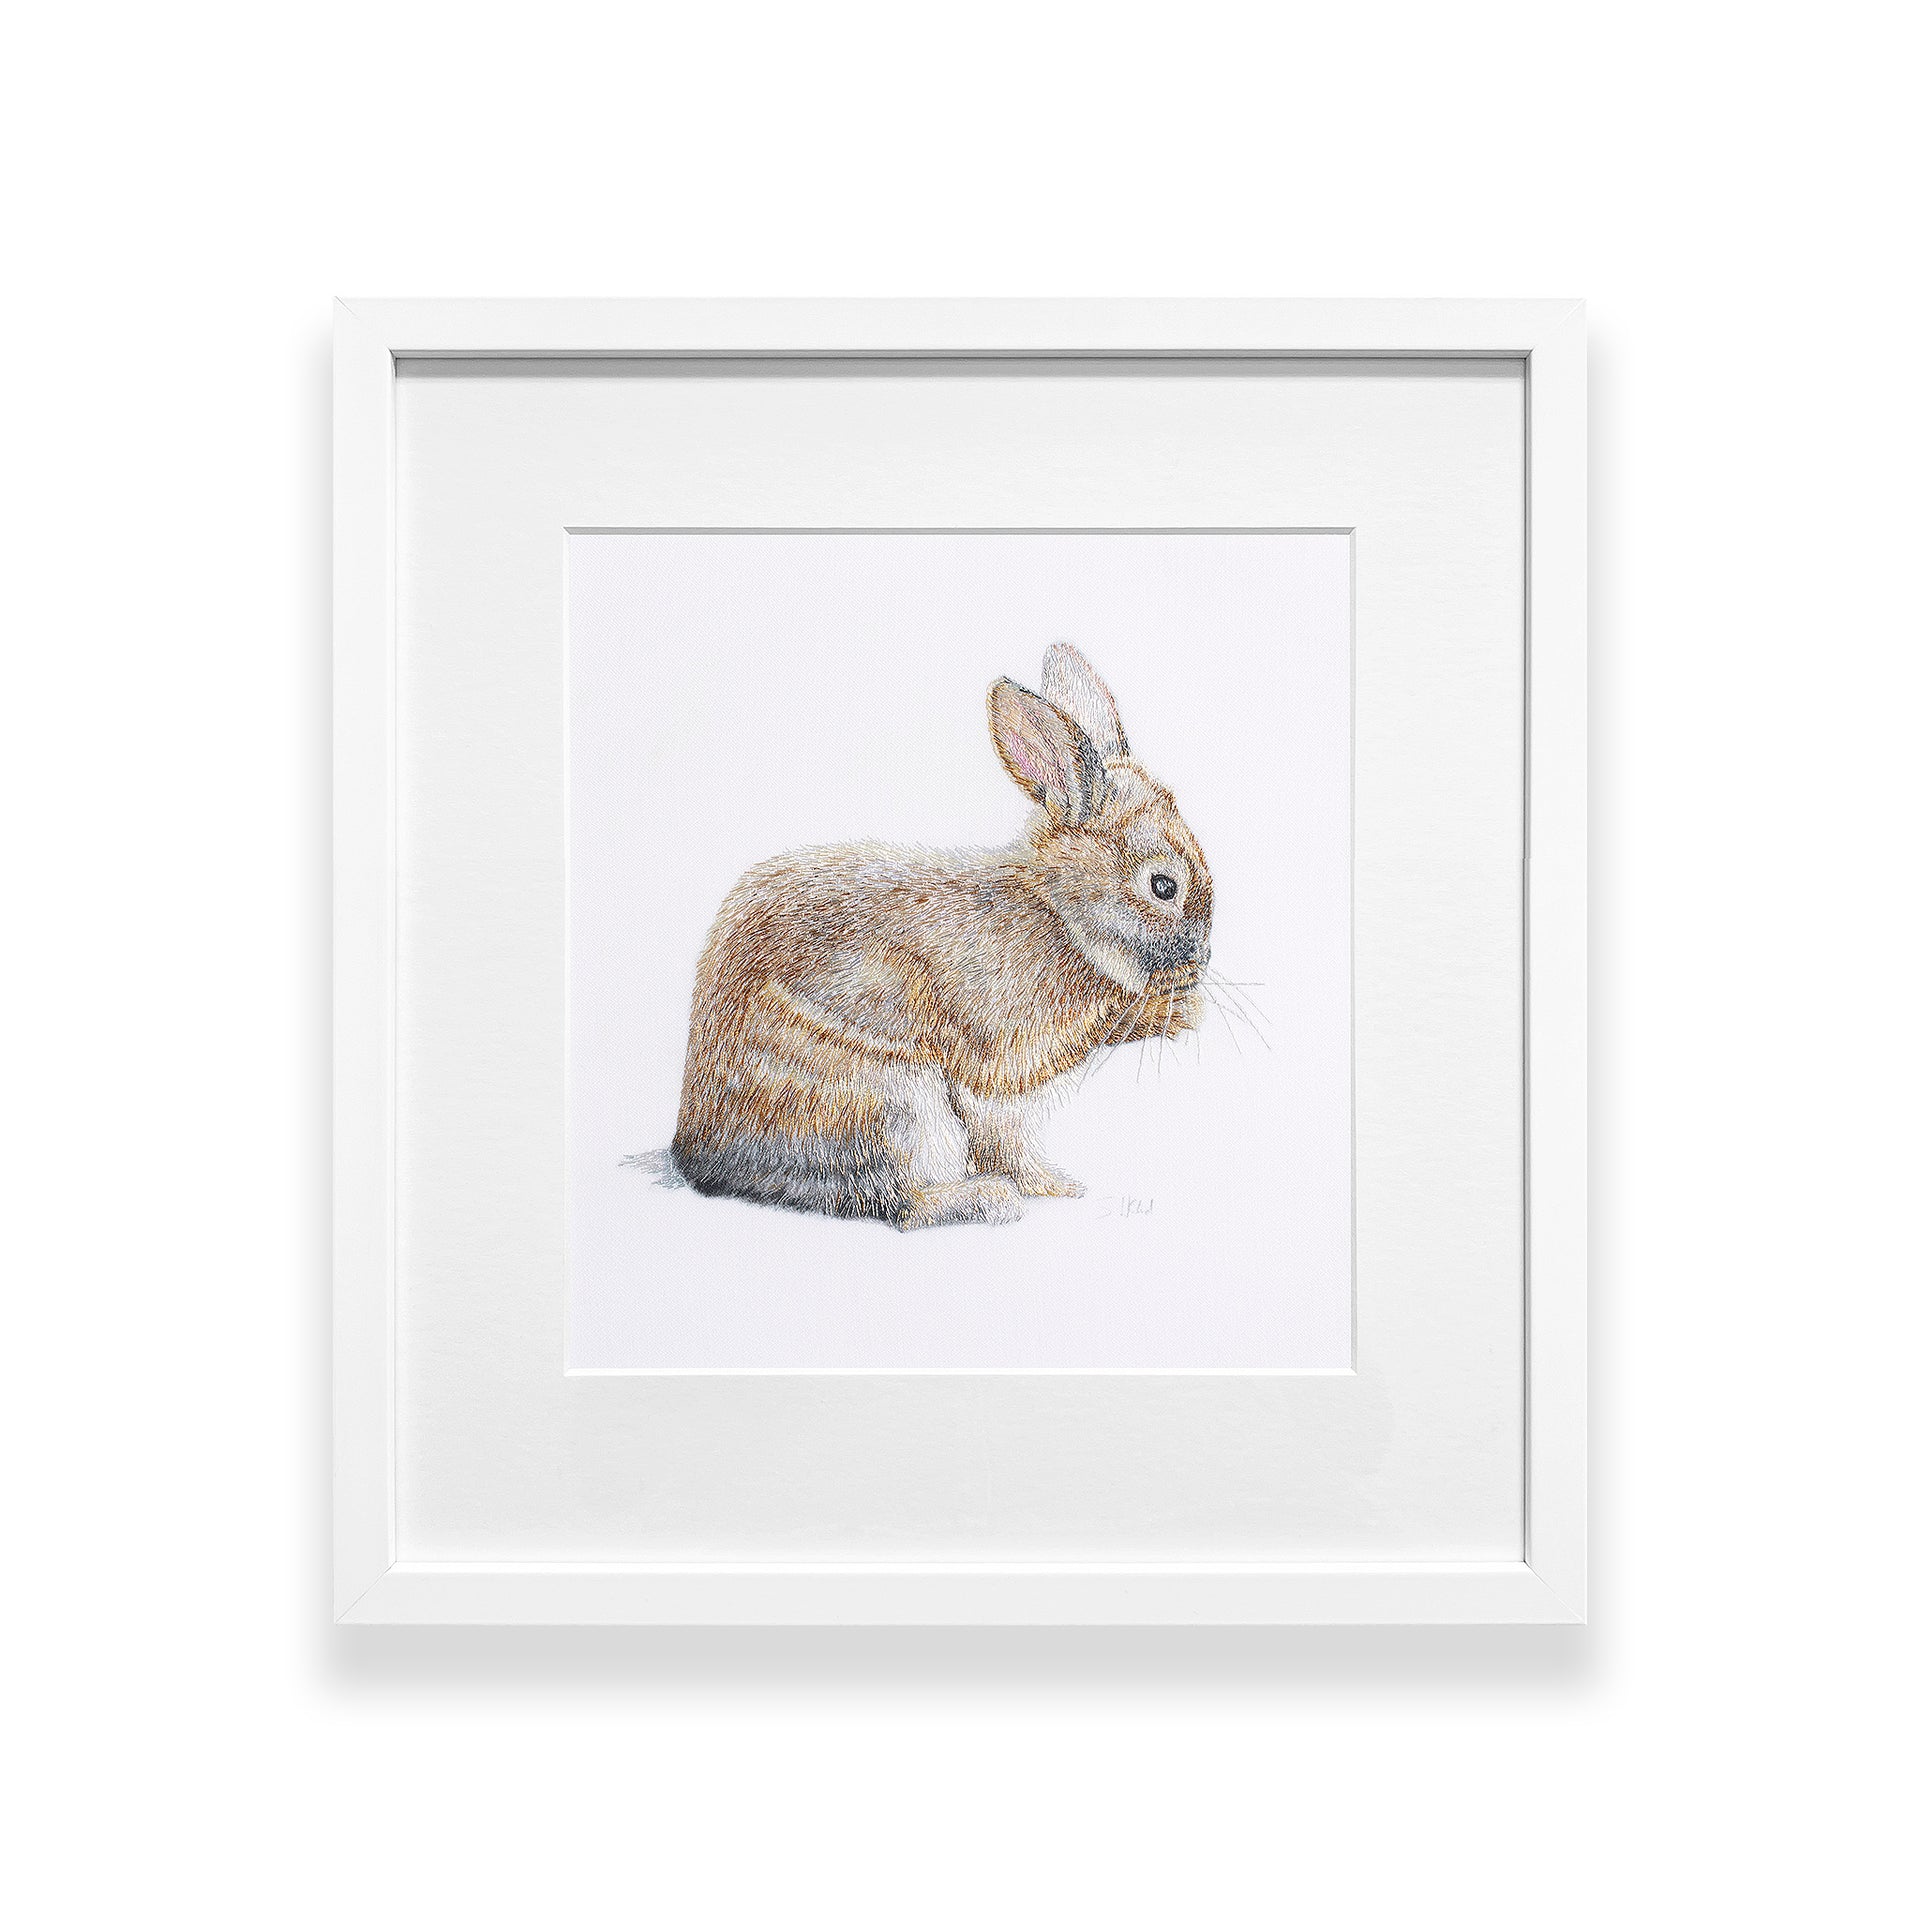 Hand embroidered bunny rabbit in a white frame